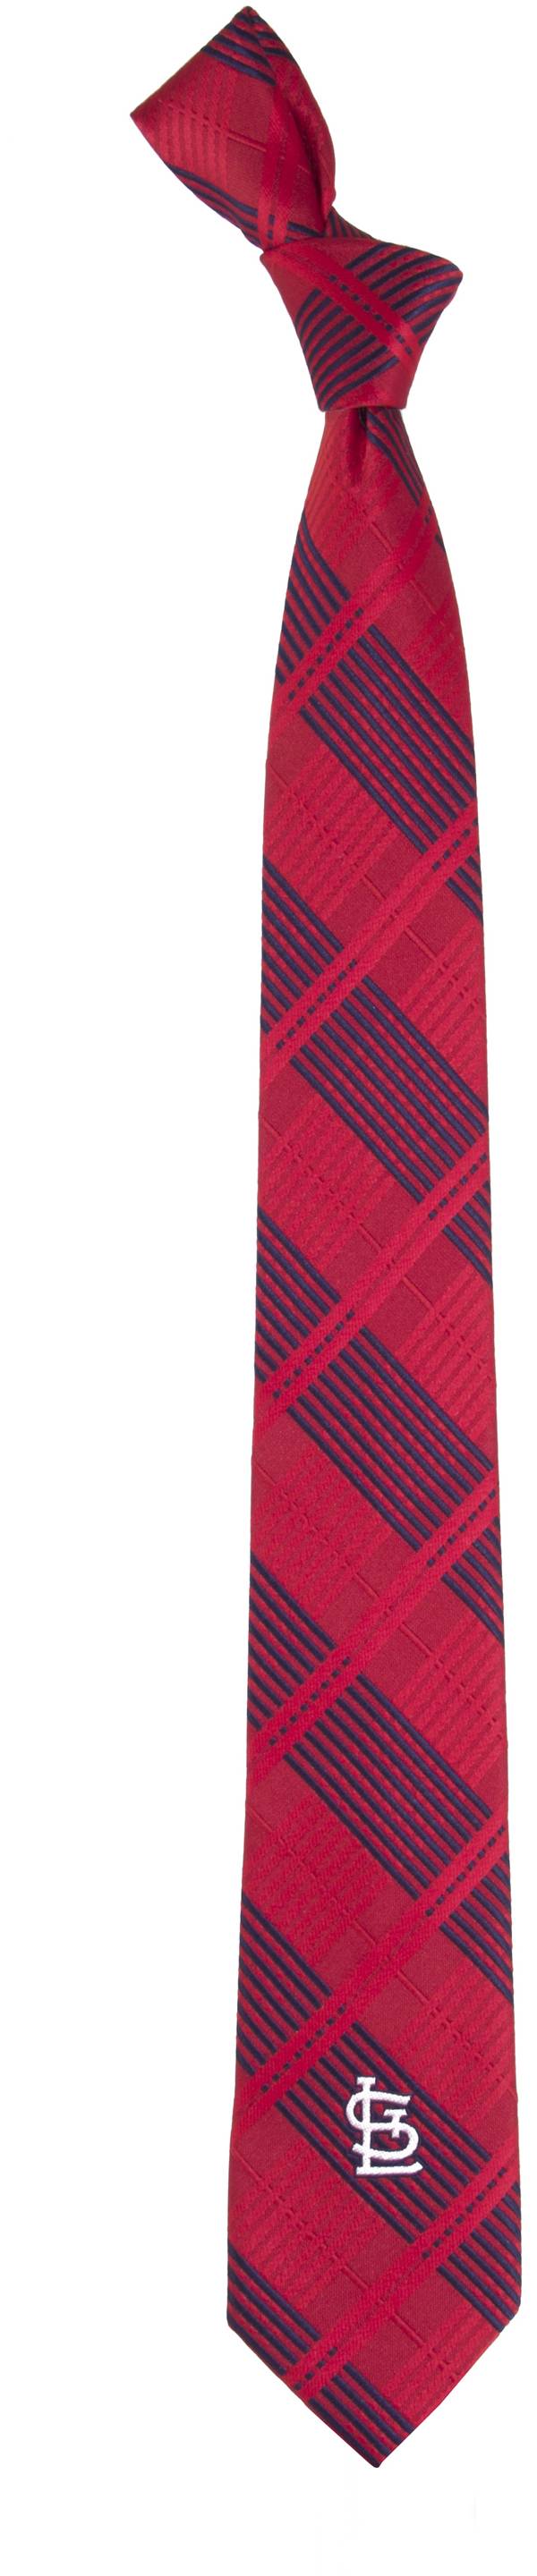 Eagles Wings St. Louis Cardinals Skinny Plaid Necktie product image